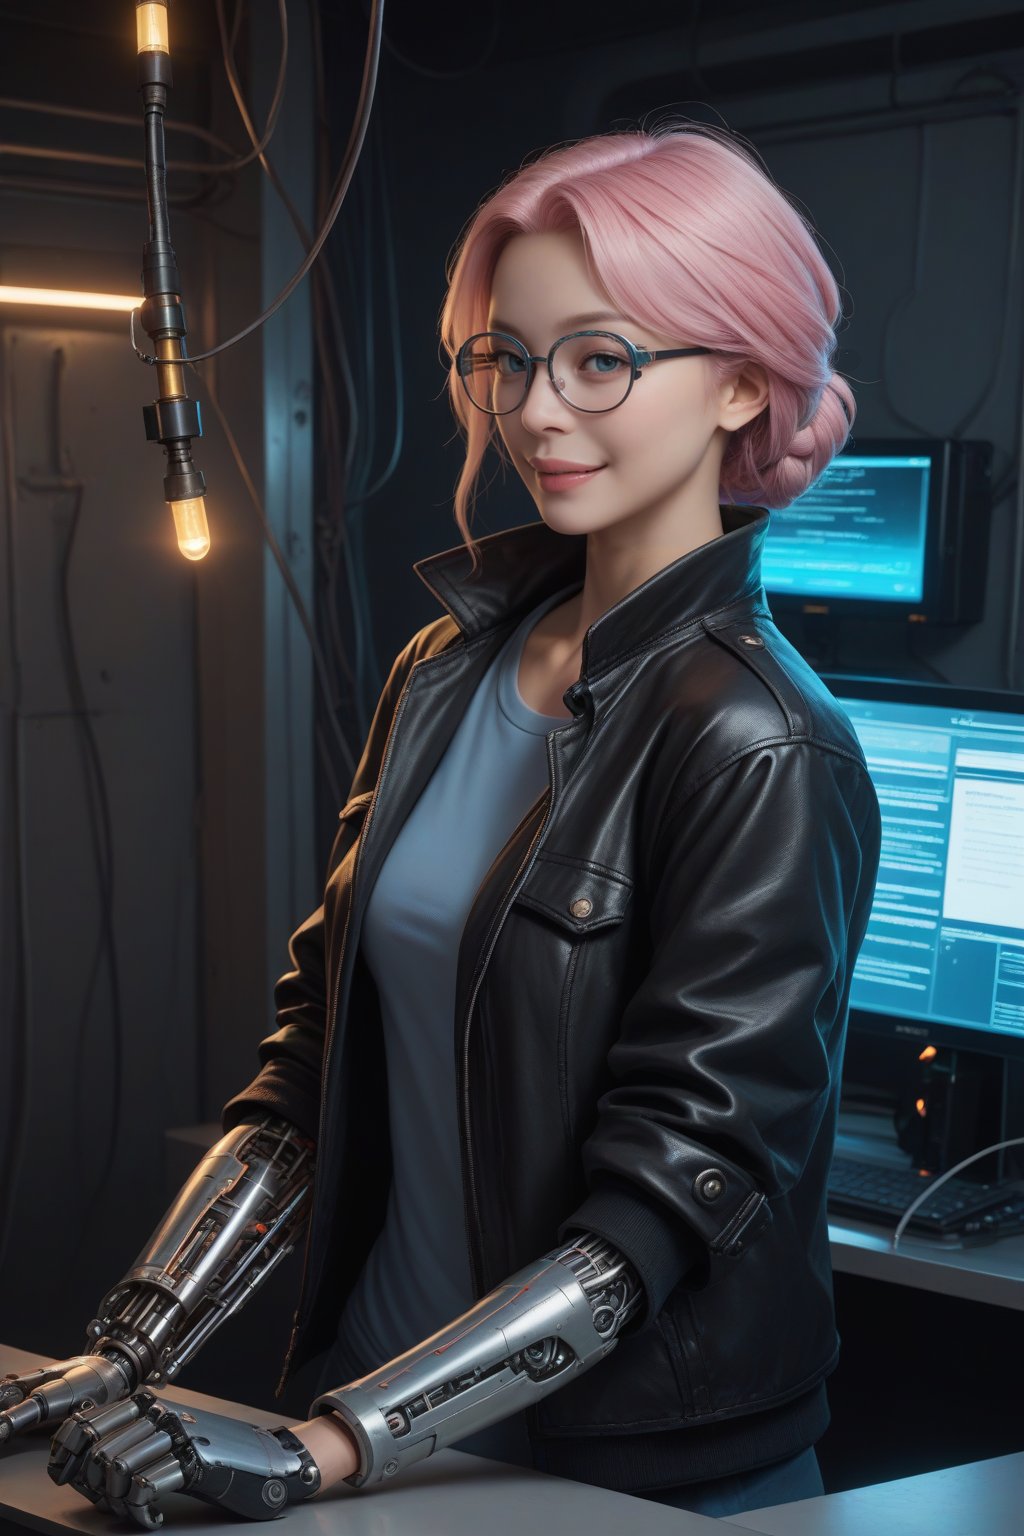 score_9, score_8_up, score_7_up, masterpiece, best quality,
BREAK
realistic,
cyberpunk girl, short pink hair, cybernetic implants, high-tech glasses, leather jacket, mechanical arm,
mysterious lab background, large mainframe computer, robotic arms, wall-mounted screens, tangled wires, flickering lights